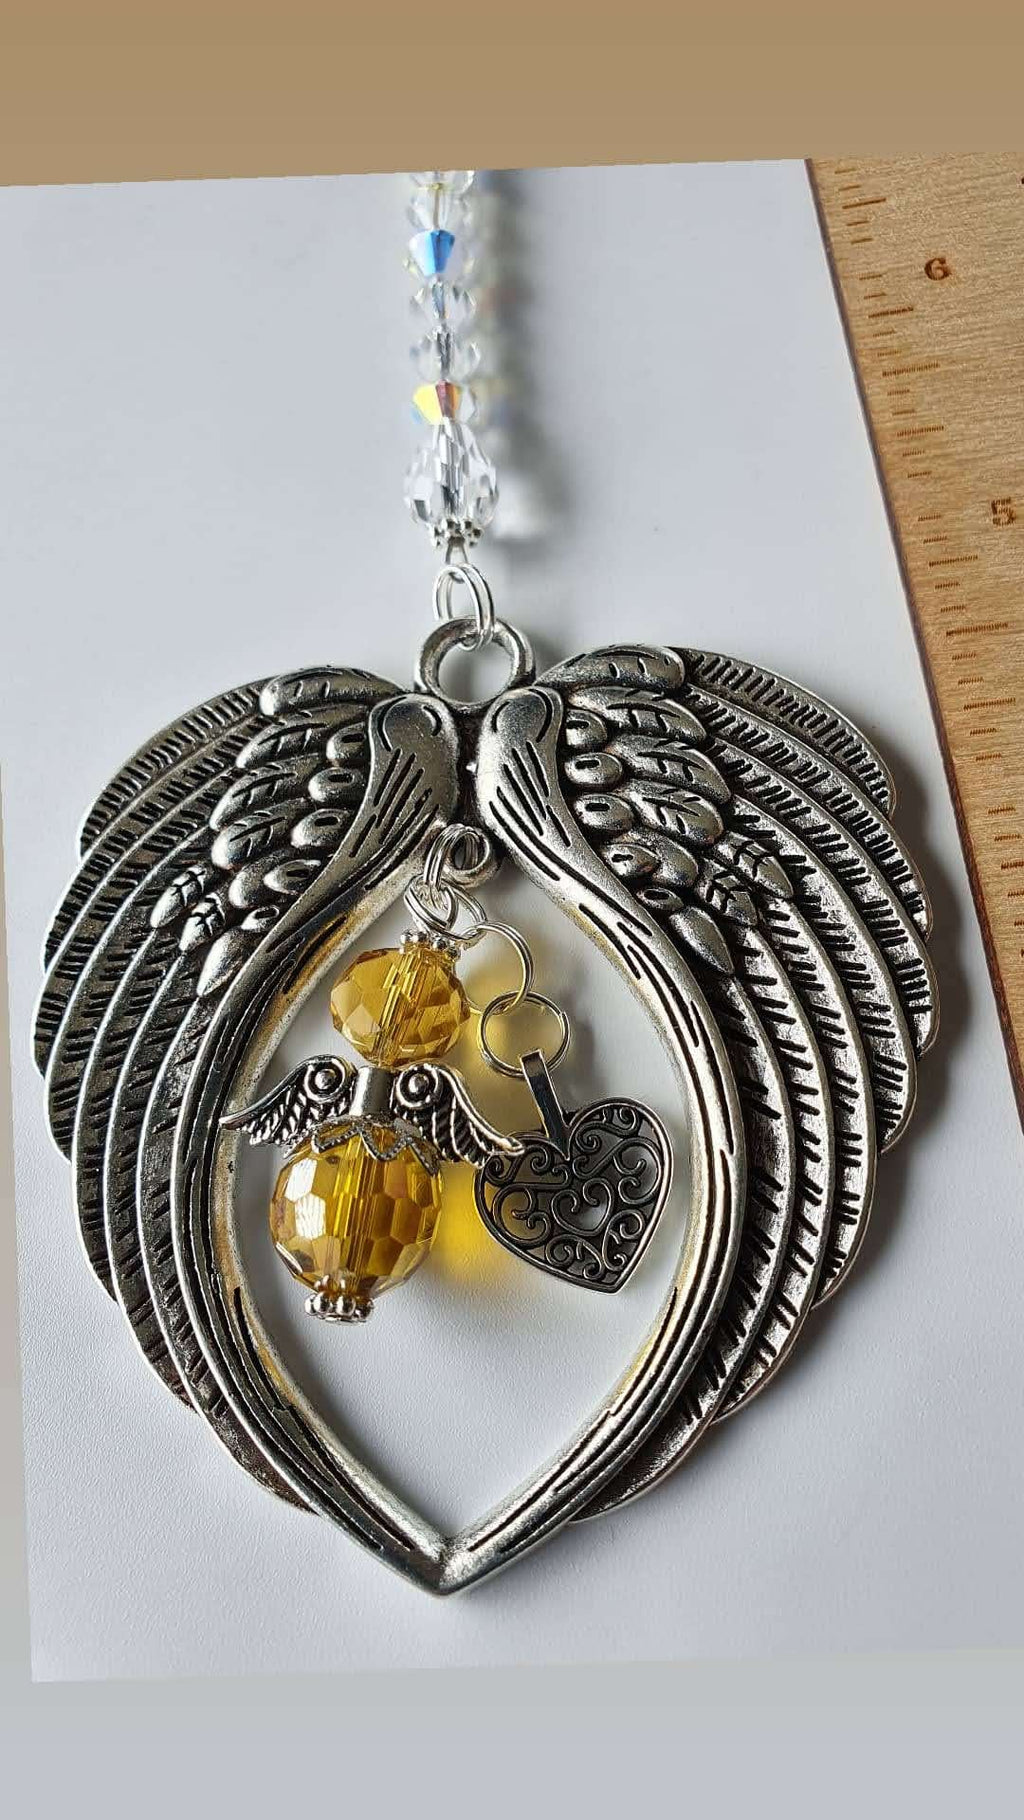 This is a picture of a silver angel wing hanging charm with a heart charm in the centre and a yellow angel with silver wings in the centre too.